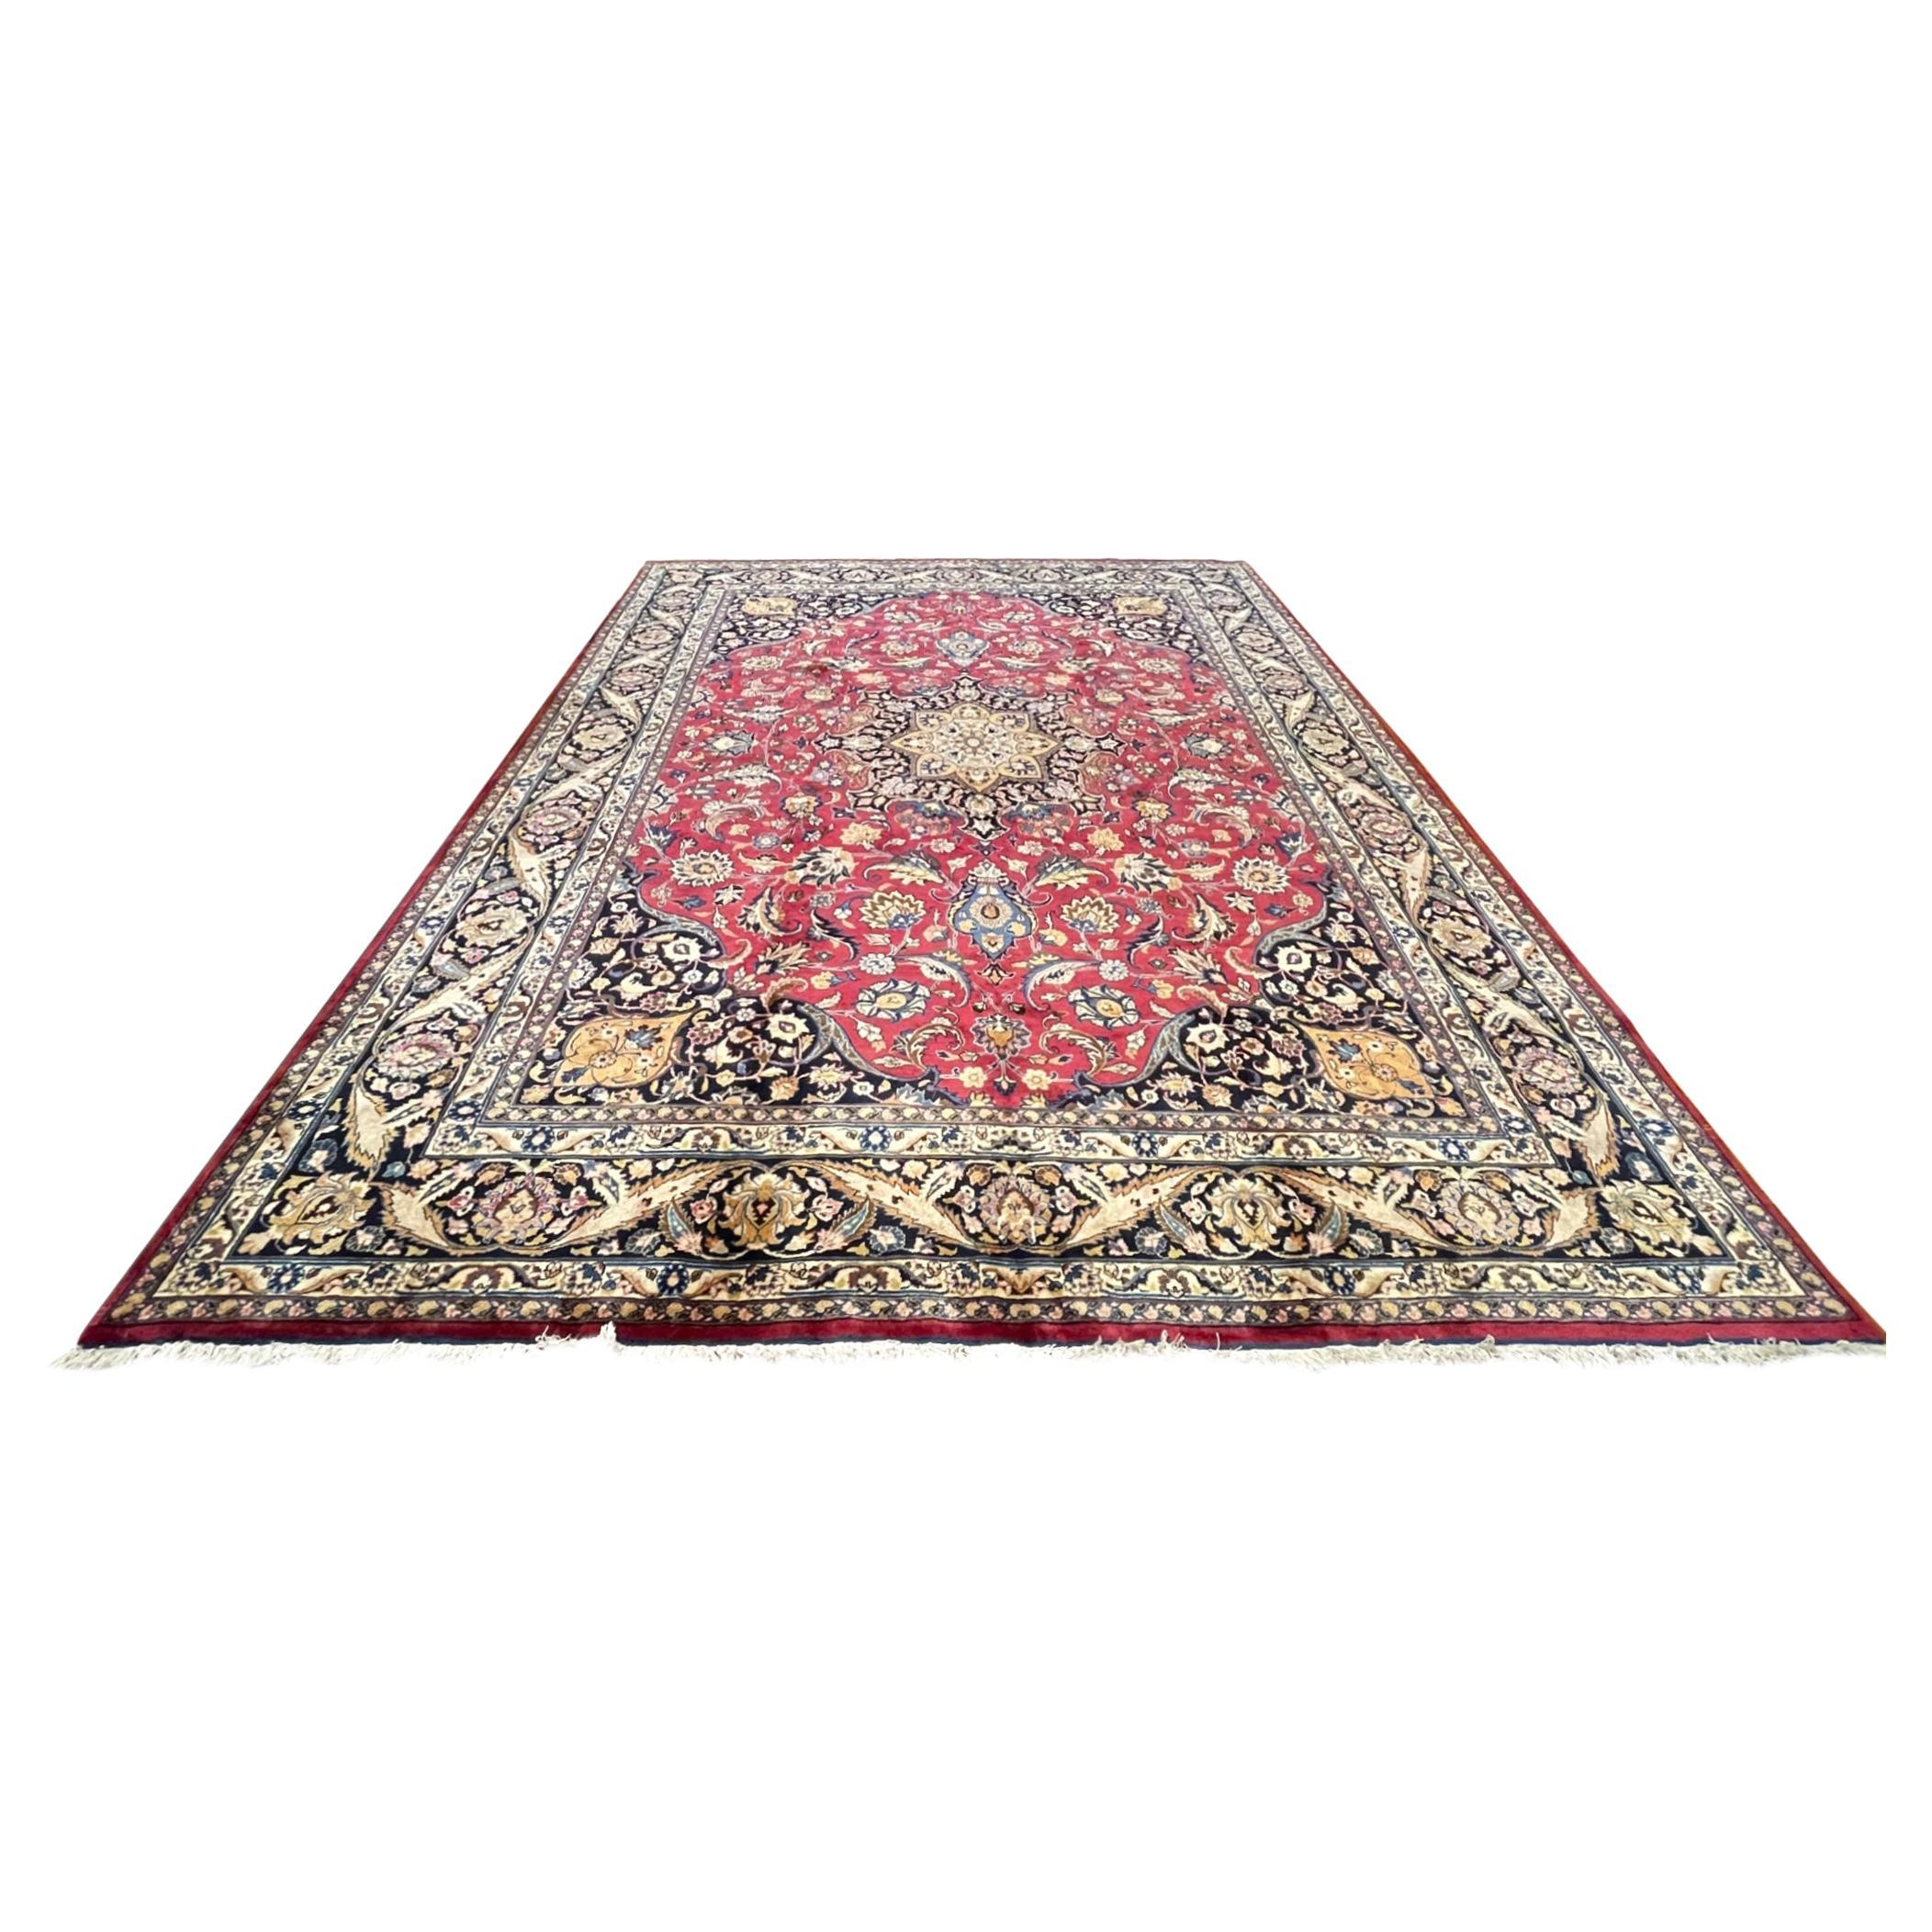 Authentic Persian Hand Knotted Medallion Floral Red Mashad Rug, Circa 1960